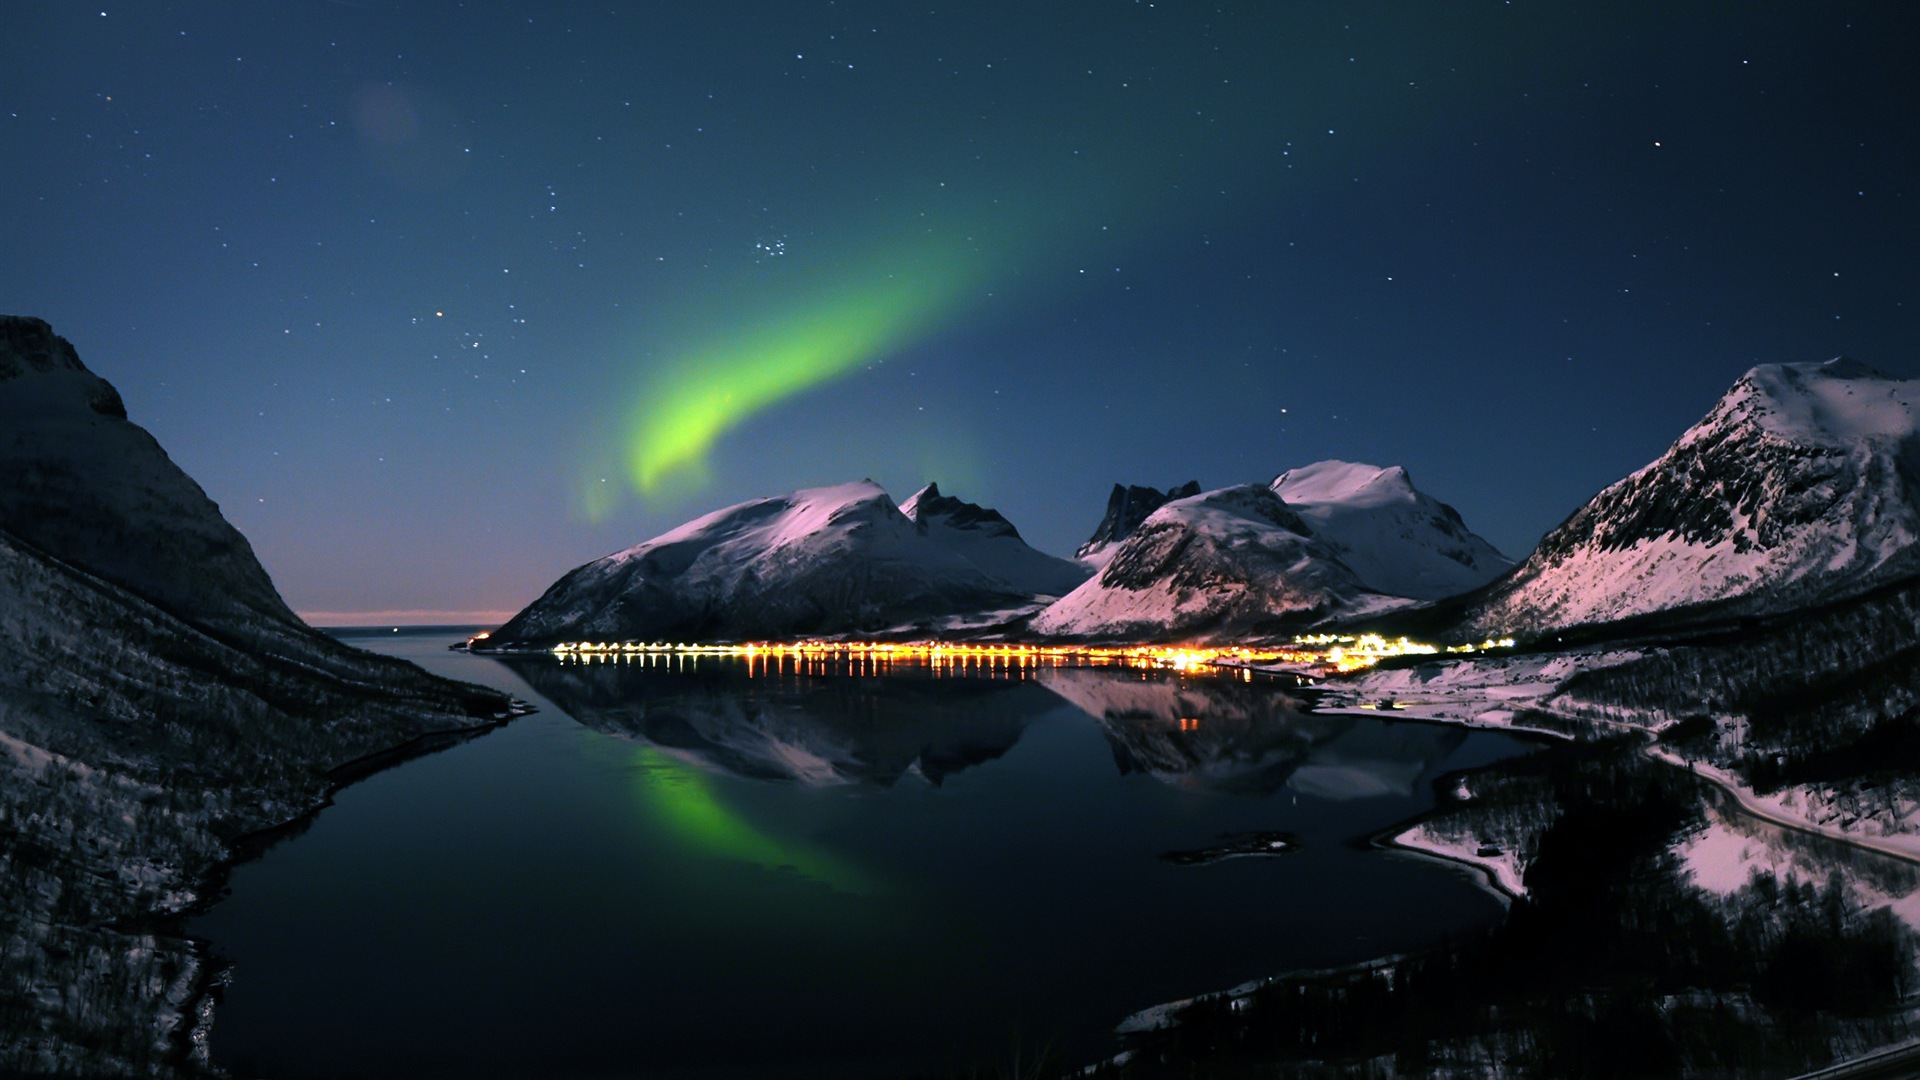 Natural wonders of the Northern Lights HD Wallpaper (2) #2 - 1920x1080